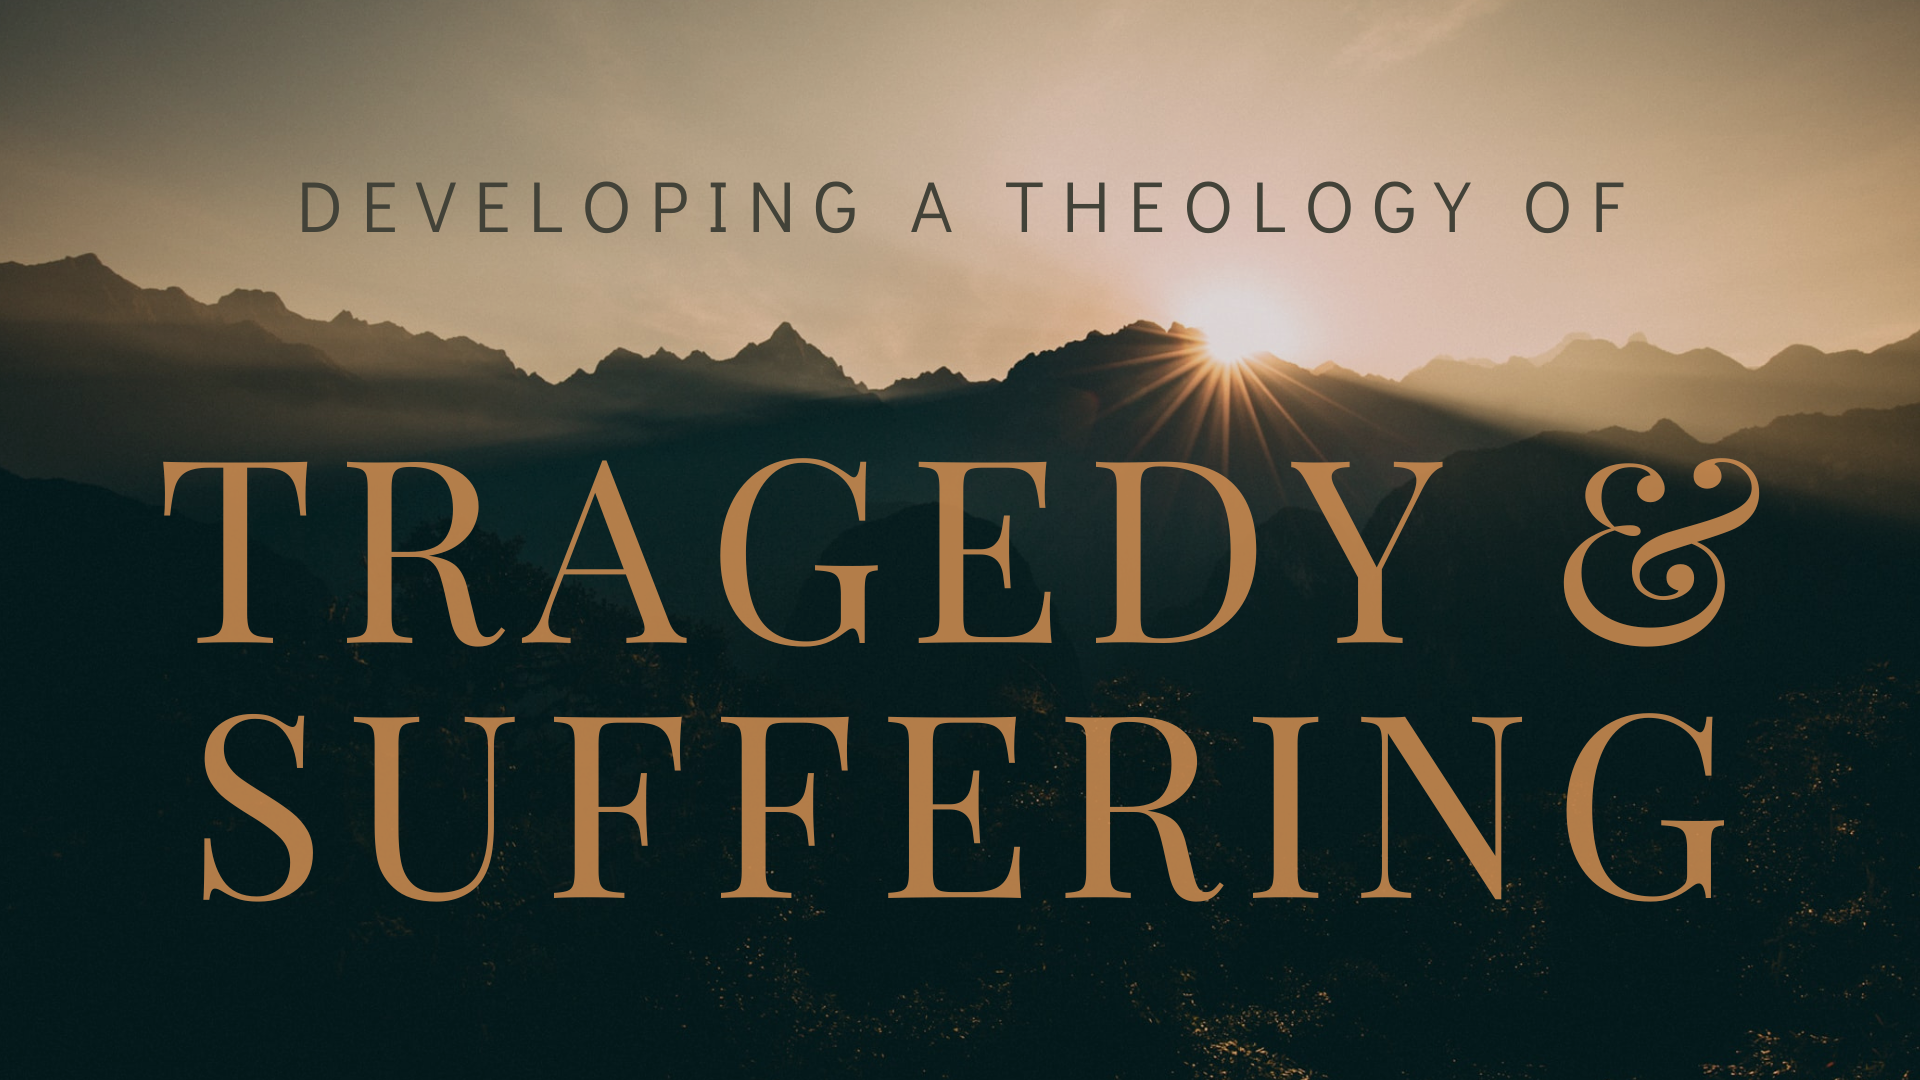 A Theology of Tragedy and Suffering Part 3